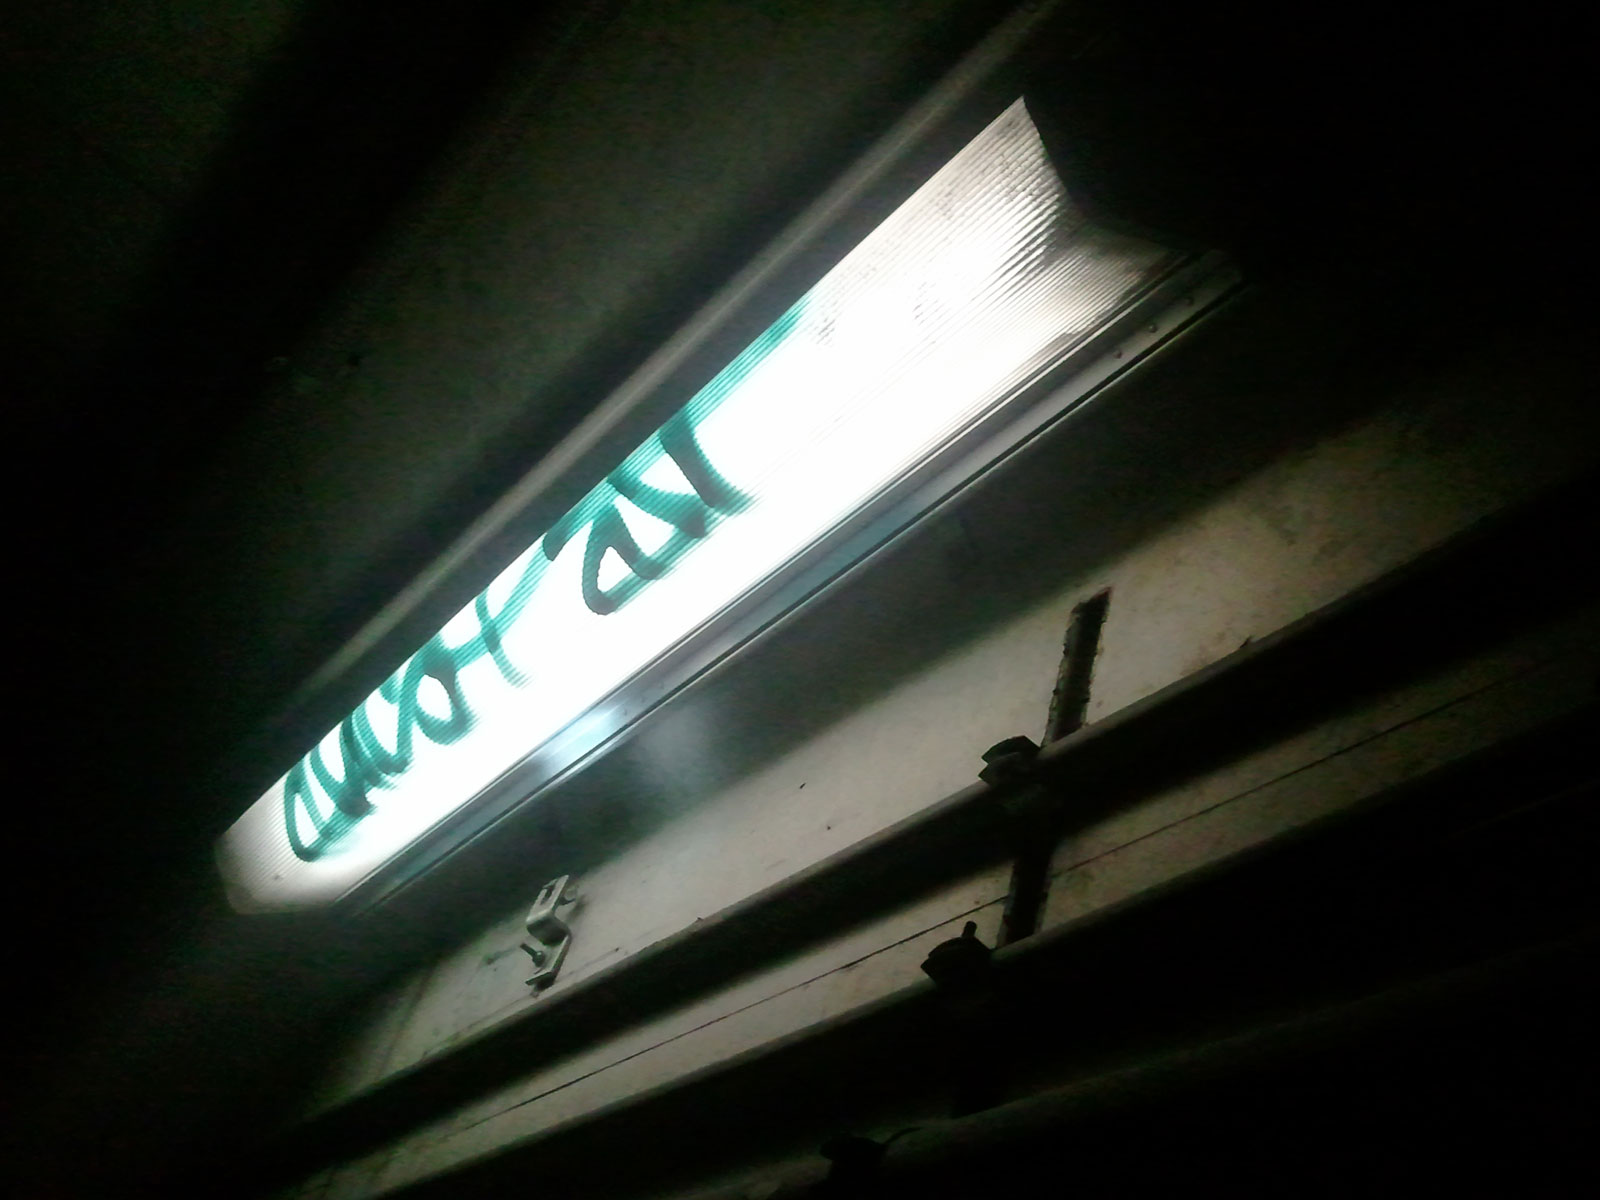 The problem of vandalism in tunnel lighting